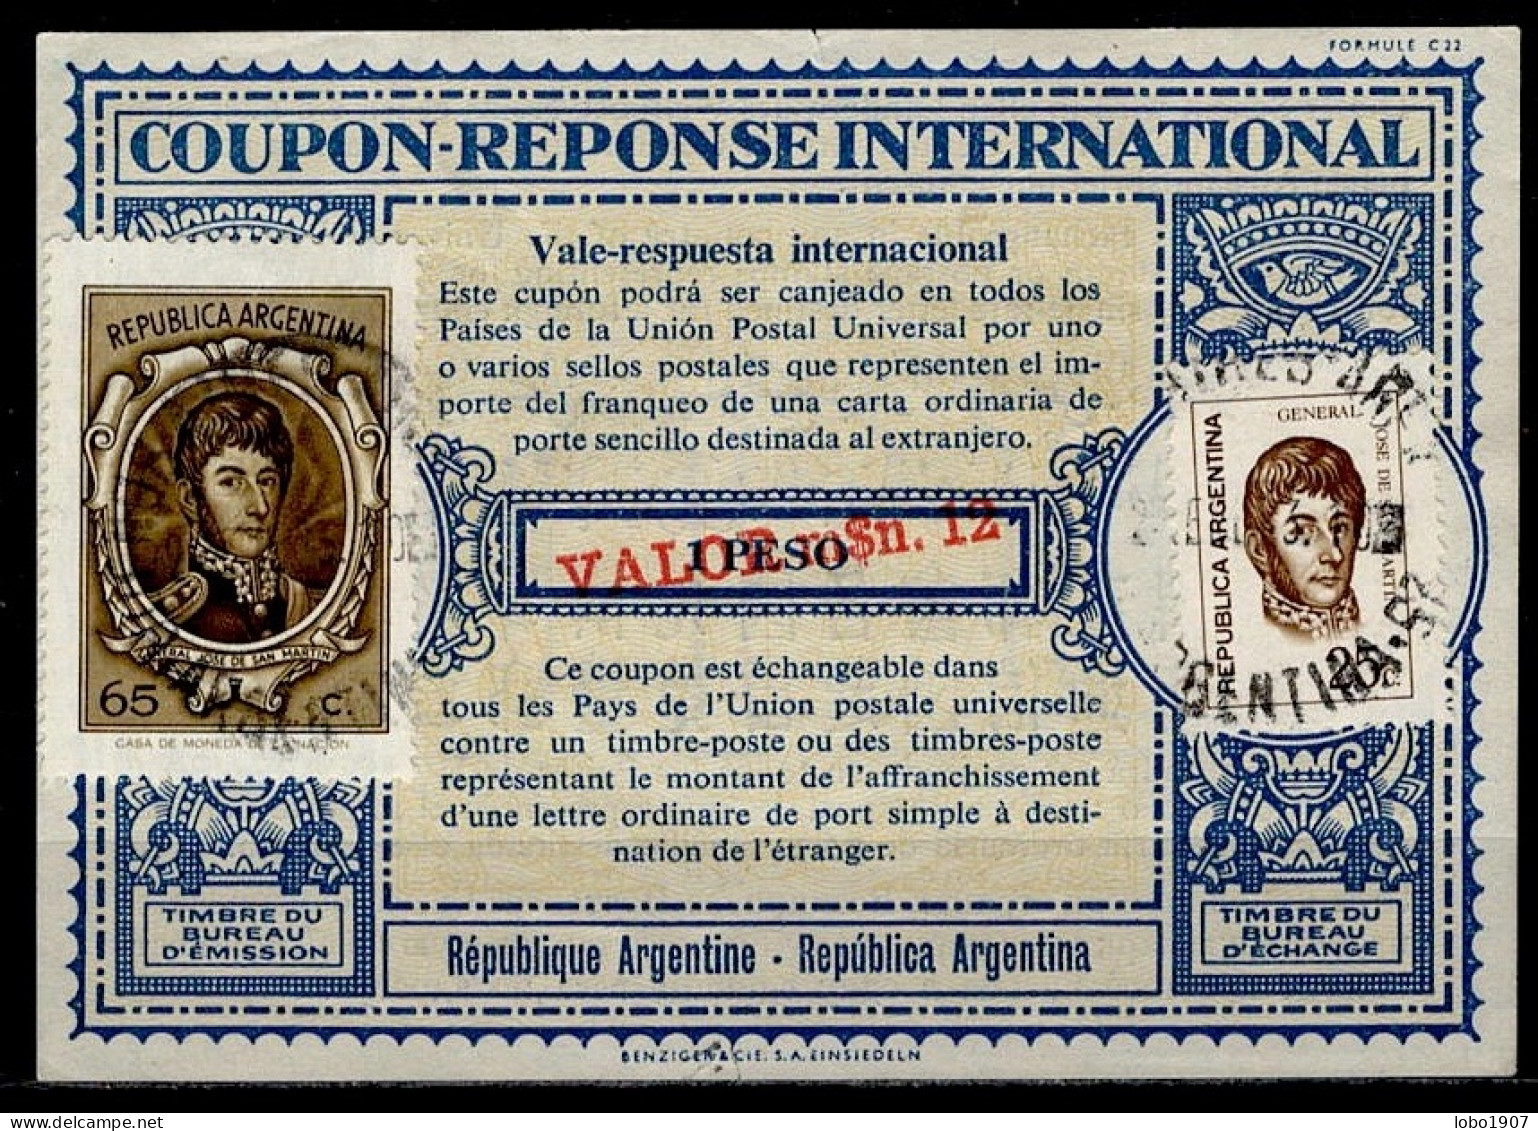 ARGENTINE ARGENTINA Lo16u  M$.12 / 1 PESO + Stamps 90 Pesos International Reply Coupon Reponse Antwortschein IRC IAS - Postal Stationery